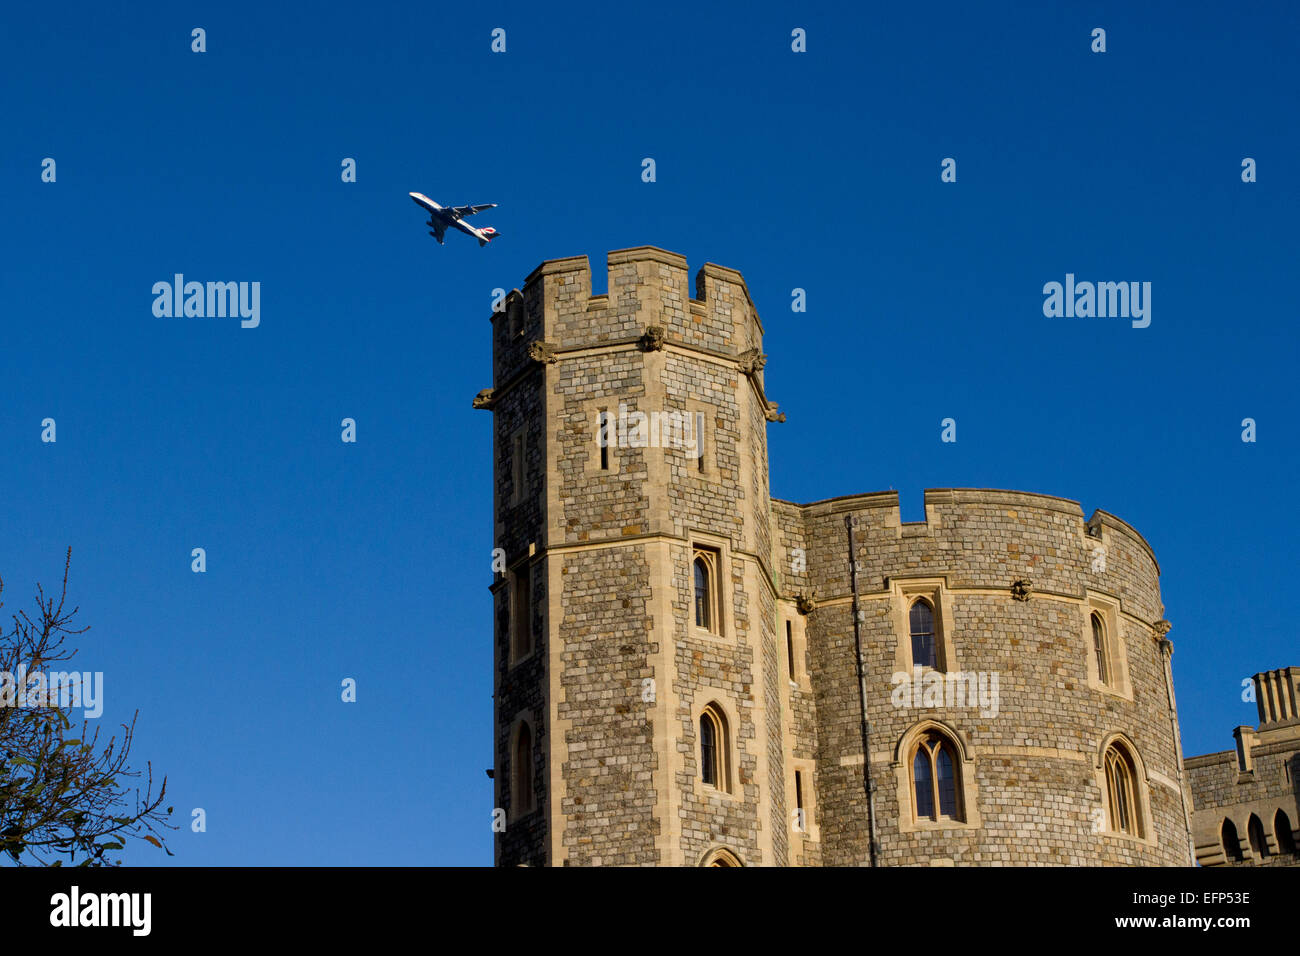 King Edward III Tower at Windsor Castle, Berkshire, England with airplane flying overhead in January Stock Photo